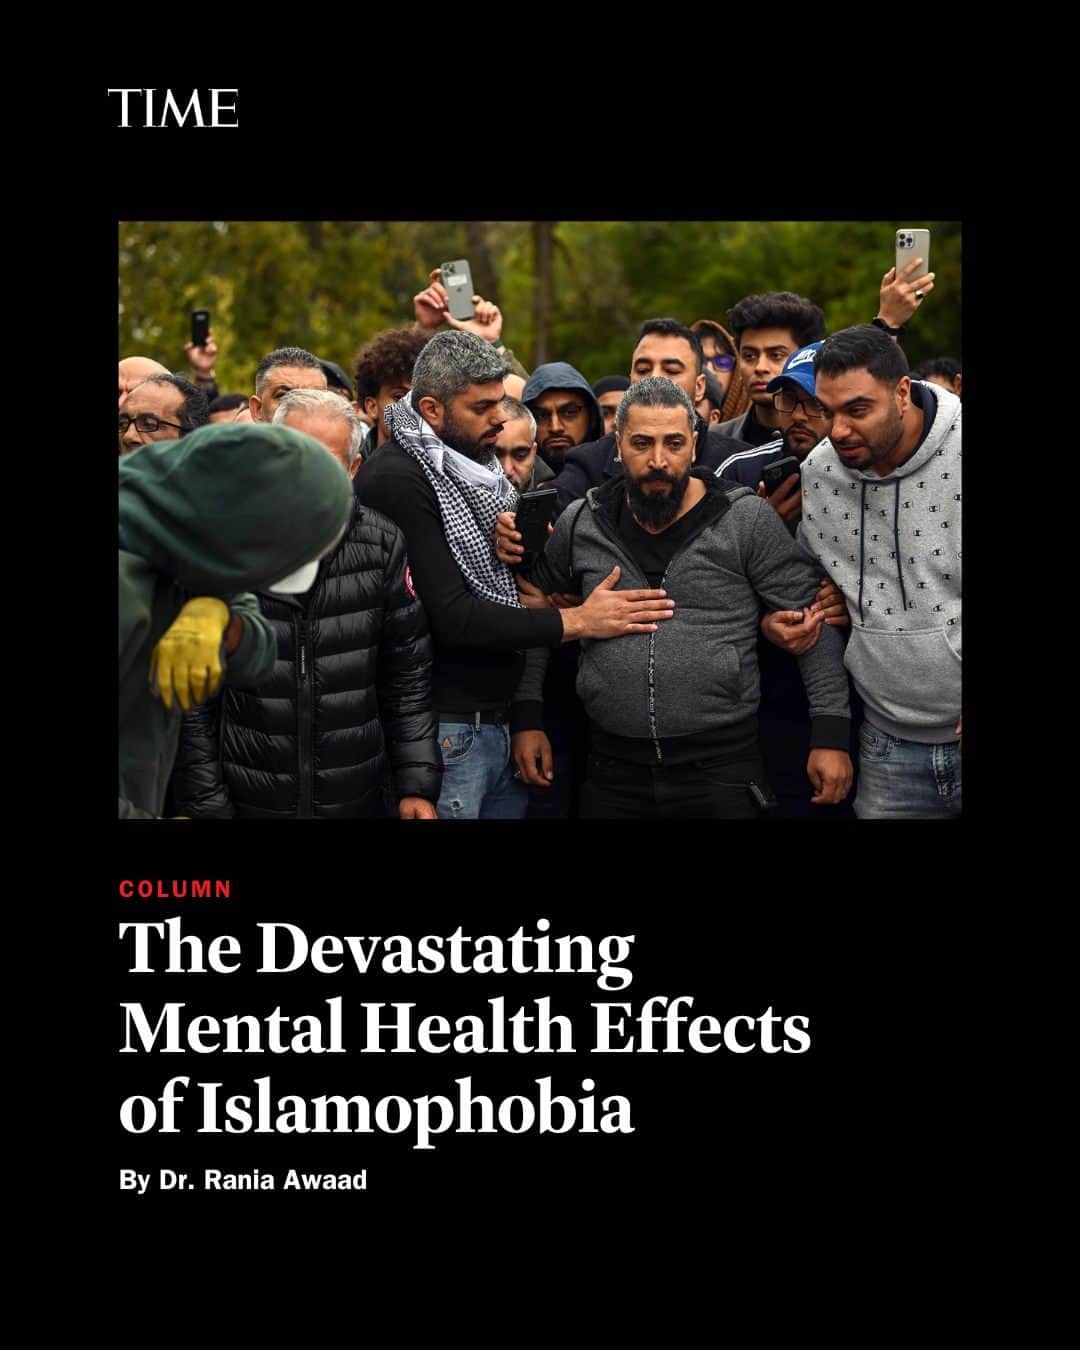 TIME Magazineのインスタグラム：「"Islamophobia, an irrational fear and hostility towards Islam or Muslims, has deep roots that can be traced back to Western colonialist archetypes of the 'uncivilized other'," writes Stanford Clinical Professor of Psychiatry Dr. Rania Awaad.  "By diminishing the complexity of individuals and essentializing Islam, these colonial powers created a seedbed for the dehumanization and generalization of people today perceived to be Muslim or Muslim-adjacent.  "And perhaps most importantly, these kinds of hate crimes and the rise of Islamophobia have extensive, negative mental health impacts on Muslim communities in the U.S. and around the world."  At the link in bio, read Dr. Awaad's full column on the devastating mental health effects of Islamophobia.   Photograph by Joshua Lott—The Washington Post/Getty Images」